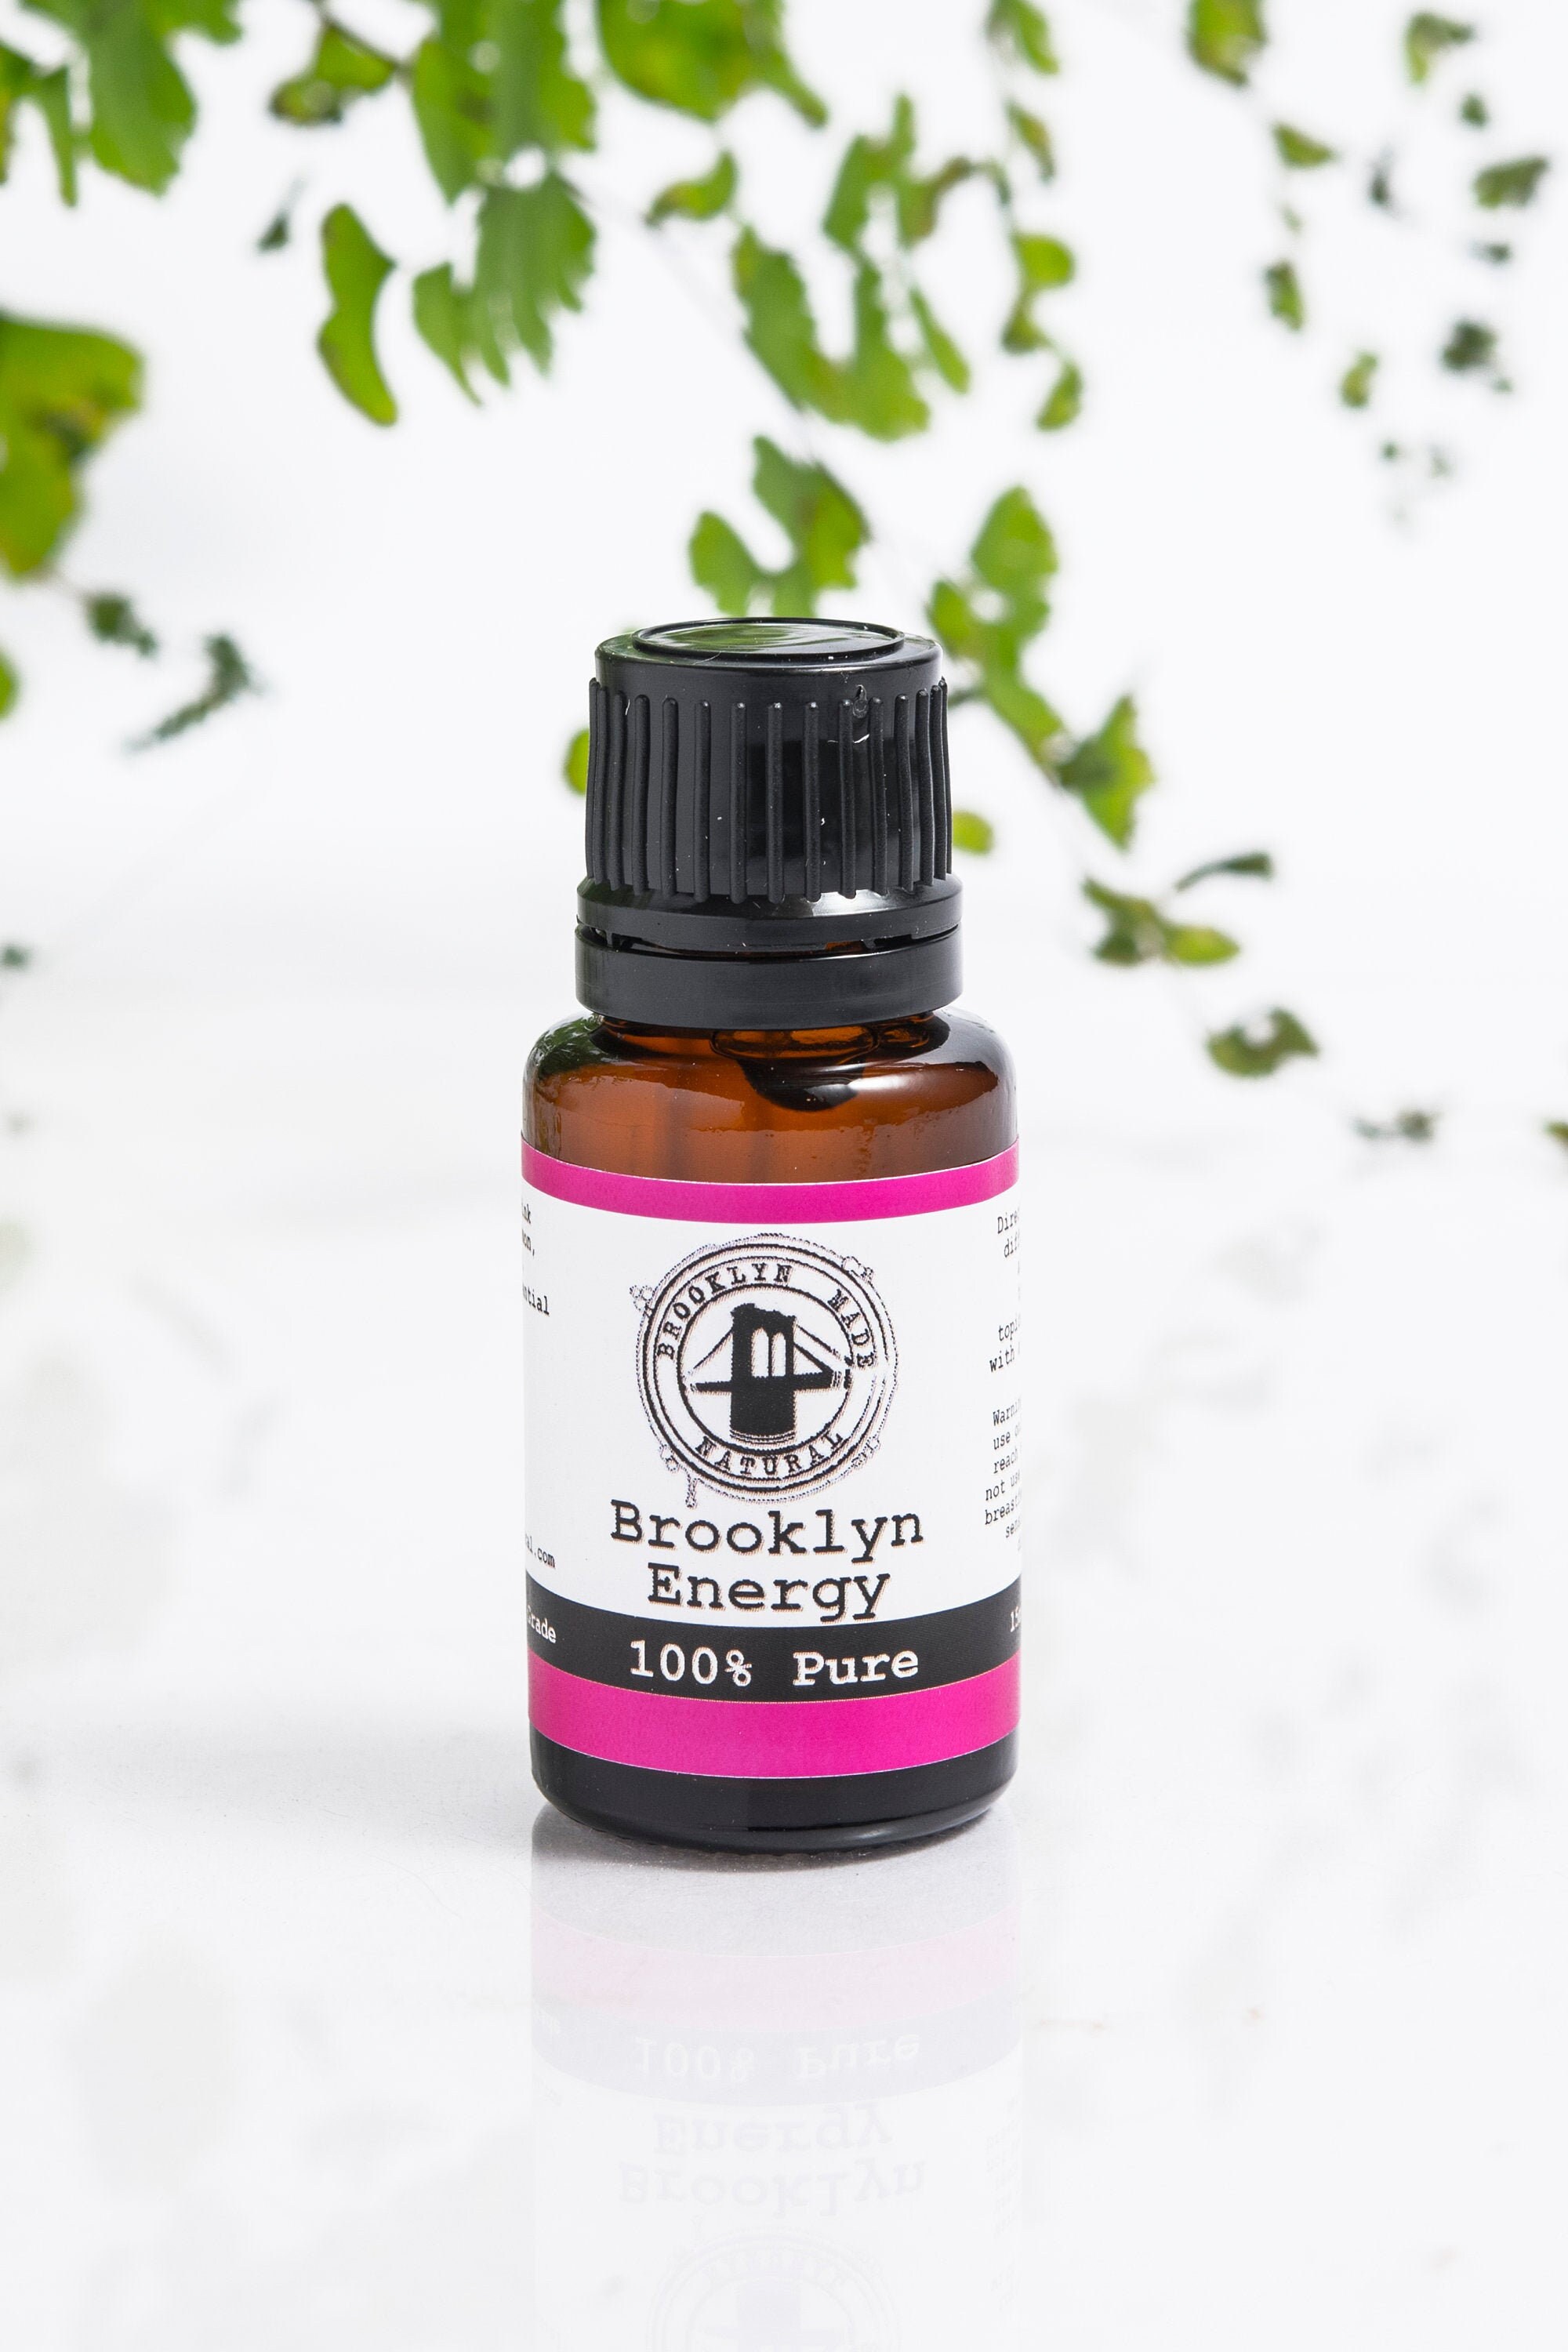 Energy Essential Oil Blend, 15Ml, Brooklyn Energizing, Uplifting, Invigorating, Steam Distilled, Pure Therapeutic Grade